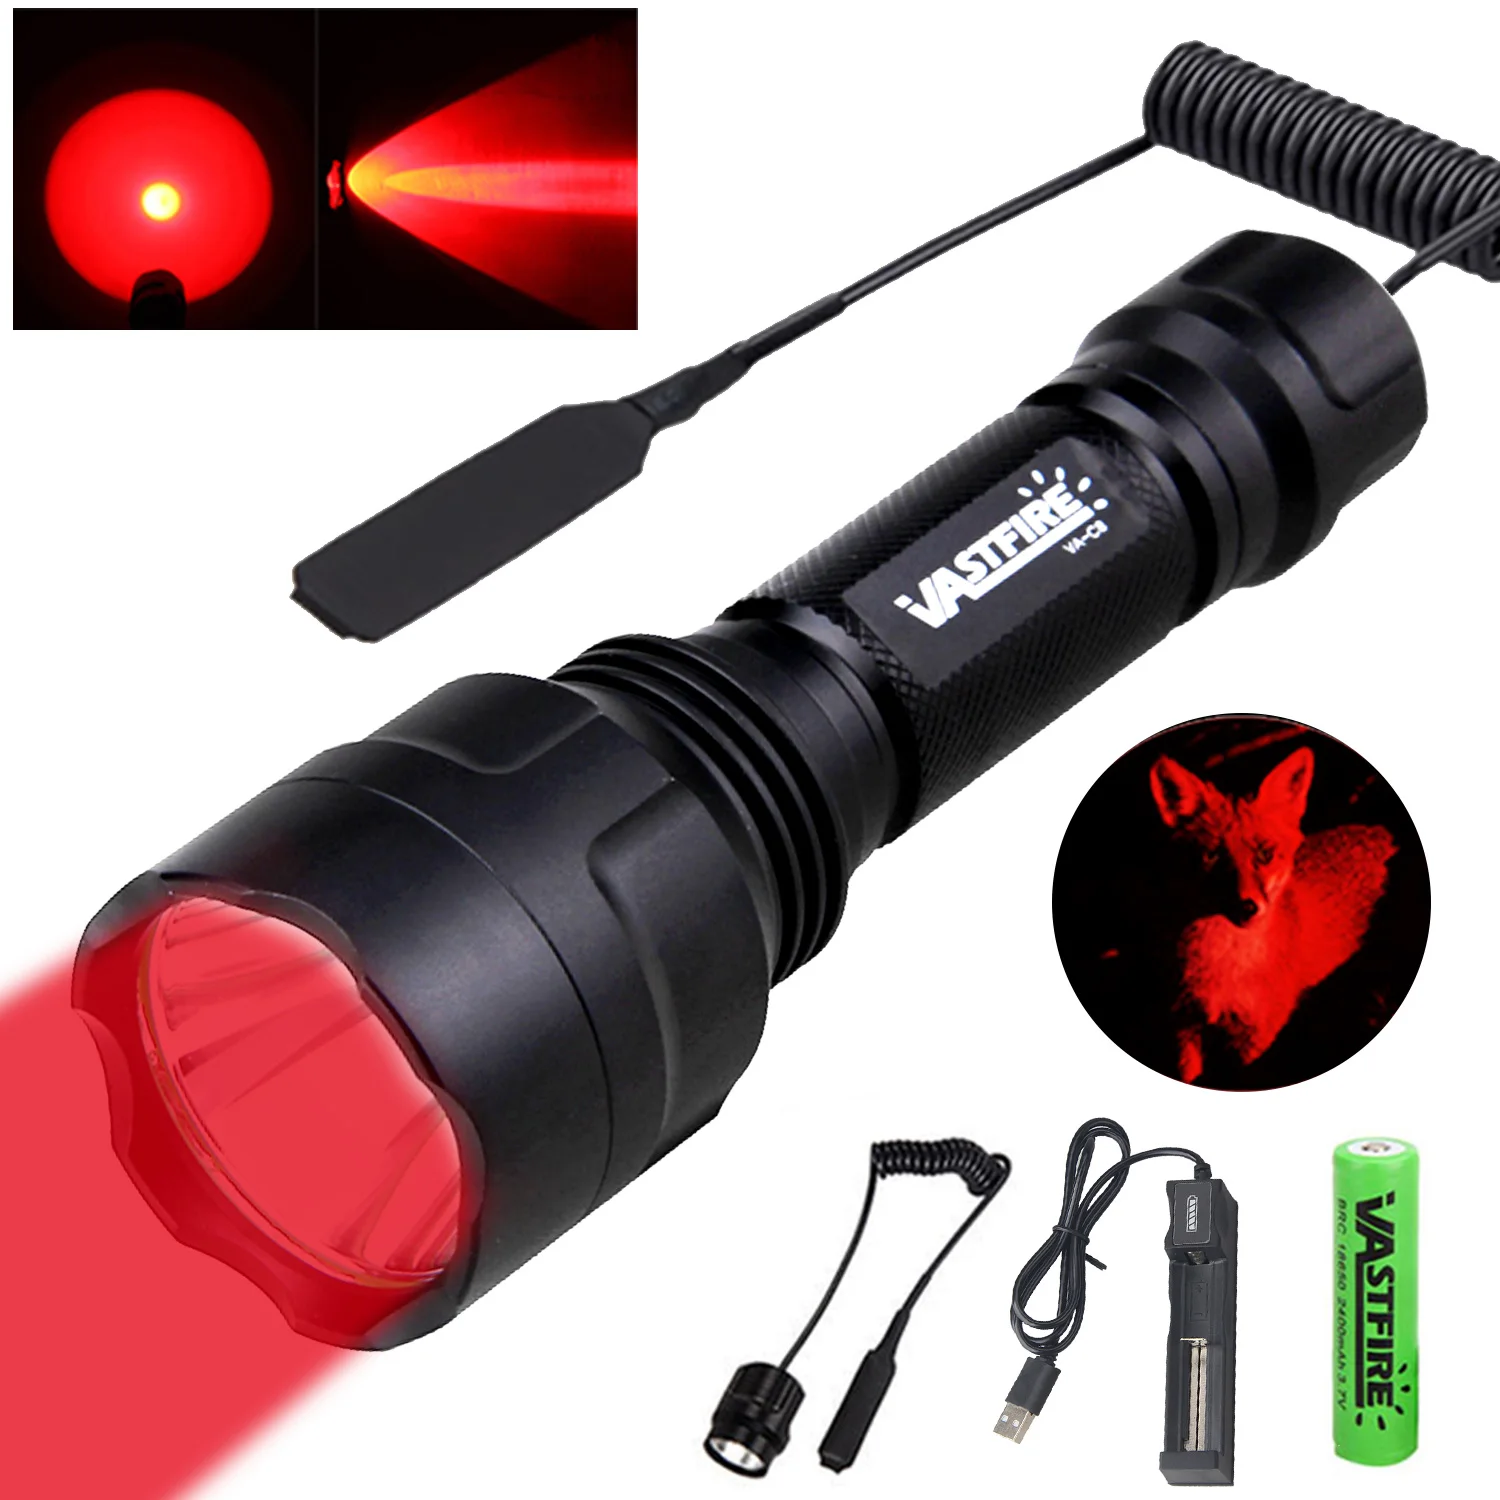 

VASTFIRE Powerful 400 Yards Red LED Hunting Flashlight Tactical C8 Predator Handheld Torch 1-Mode Lamps for Coyote Hog Varmint